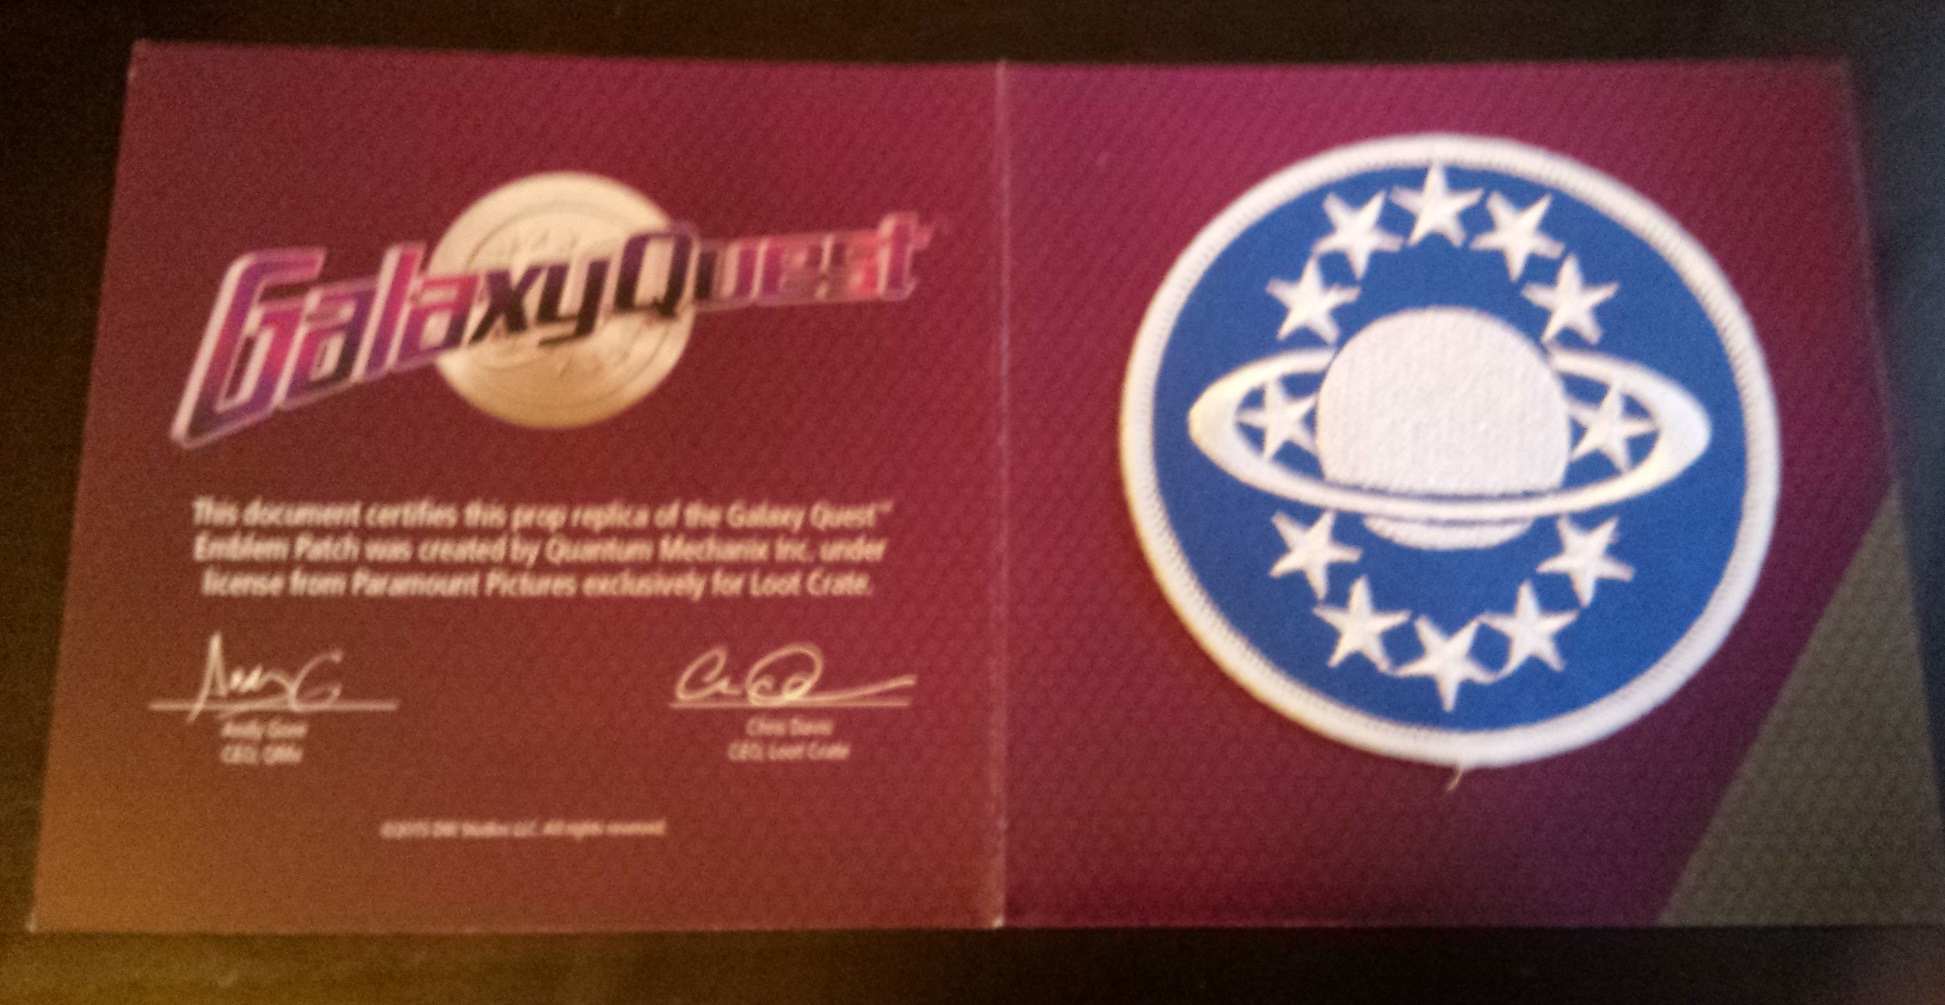 Galaxy quest, loot crate discovery